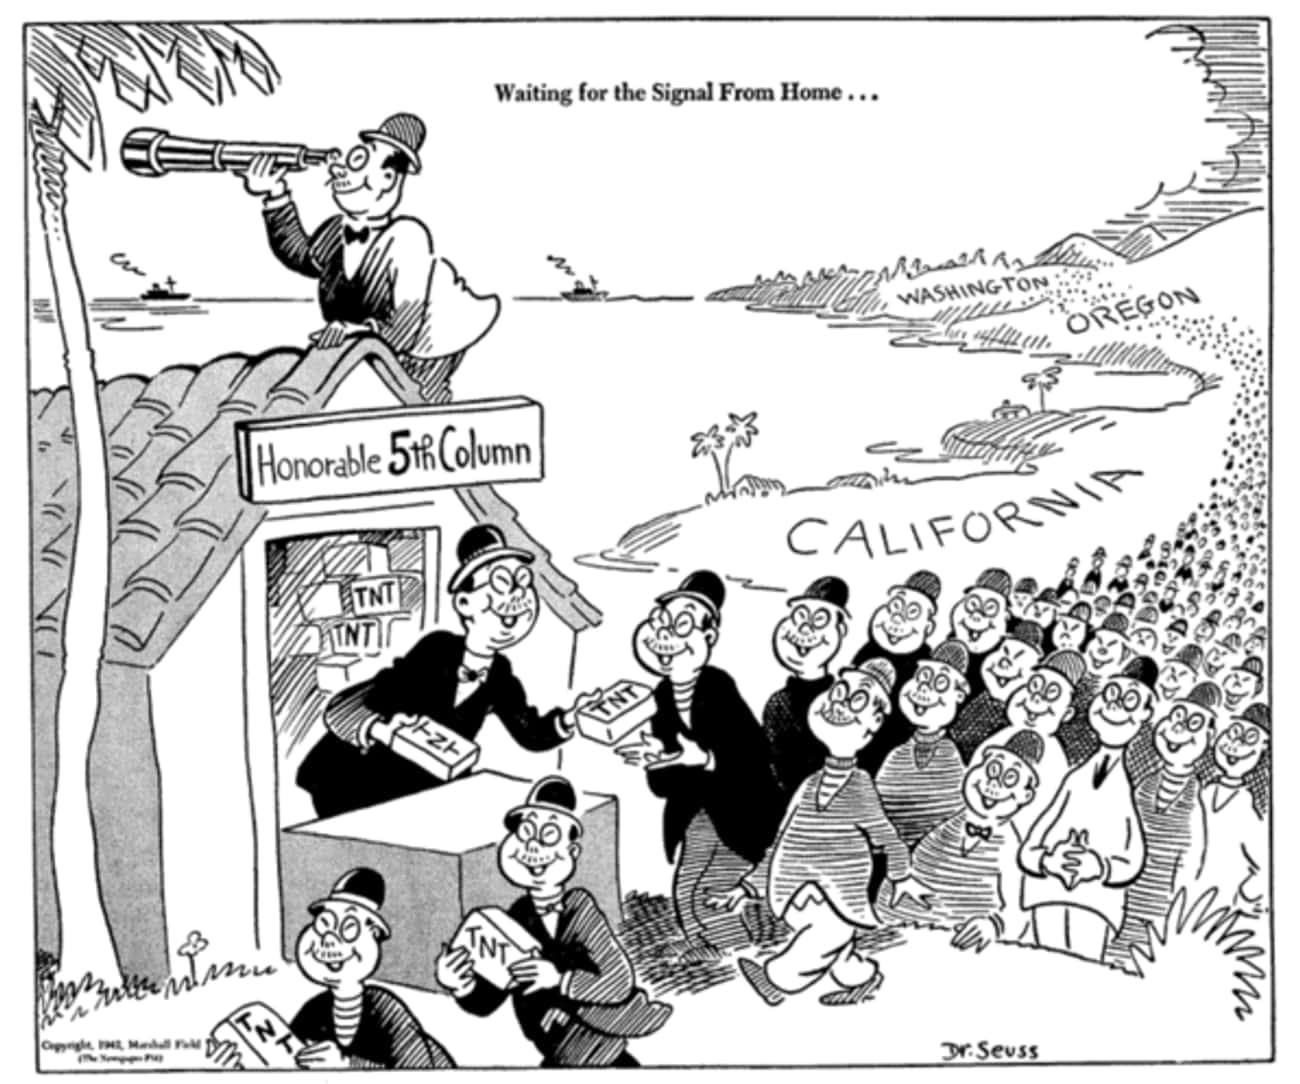 Seuss Was Hired To Create Offensive Anti-Japanese Propaganda During The Second World War